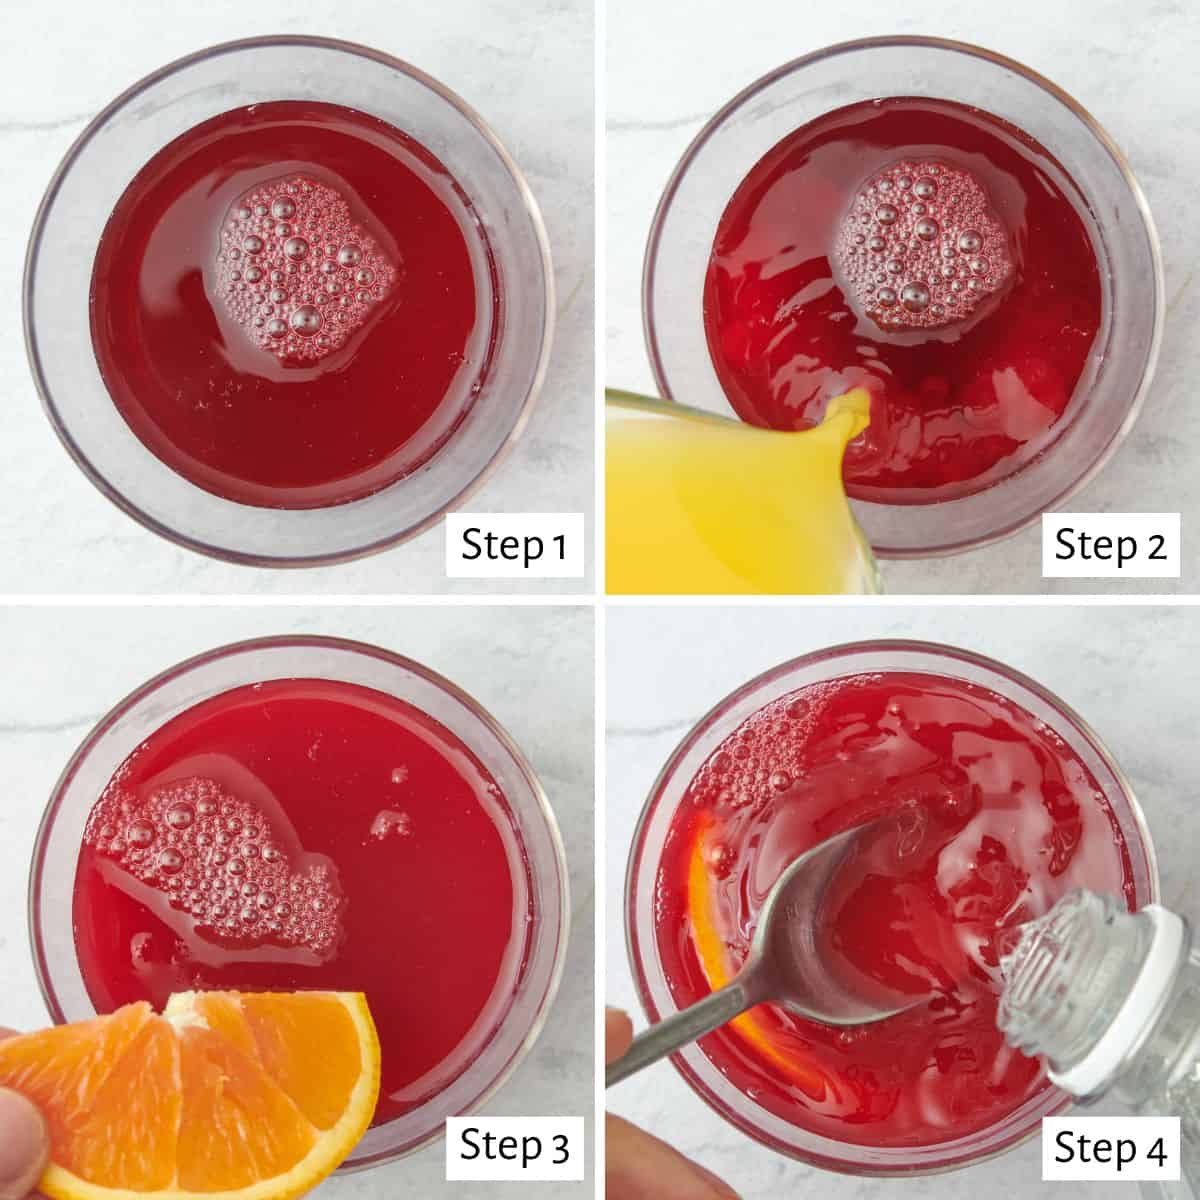 4 image collage making recipe: step 1- cranberry juice in a glass, step 2- orange juice being poured into it, step 3- adding an orange slice to the mix, 4- spoon stirring the drink while pouring in club soda.